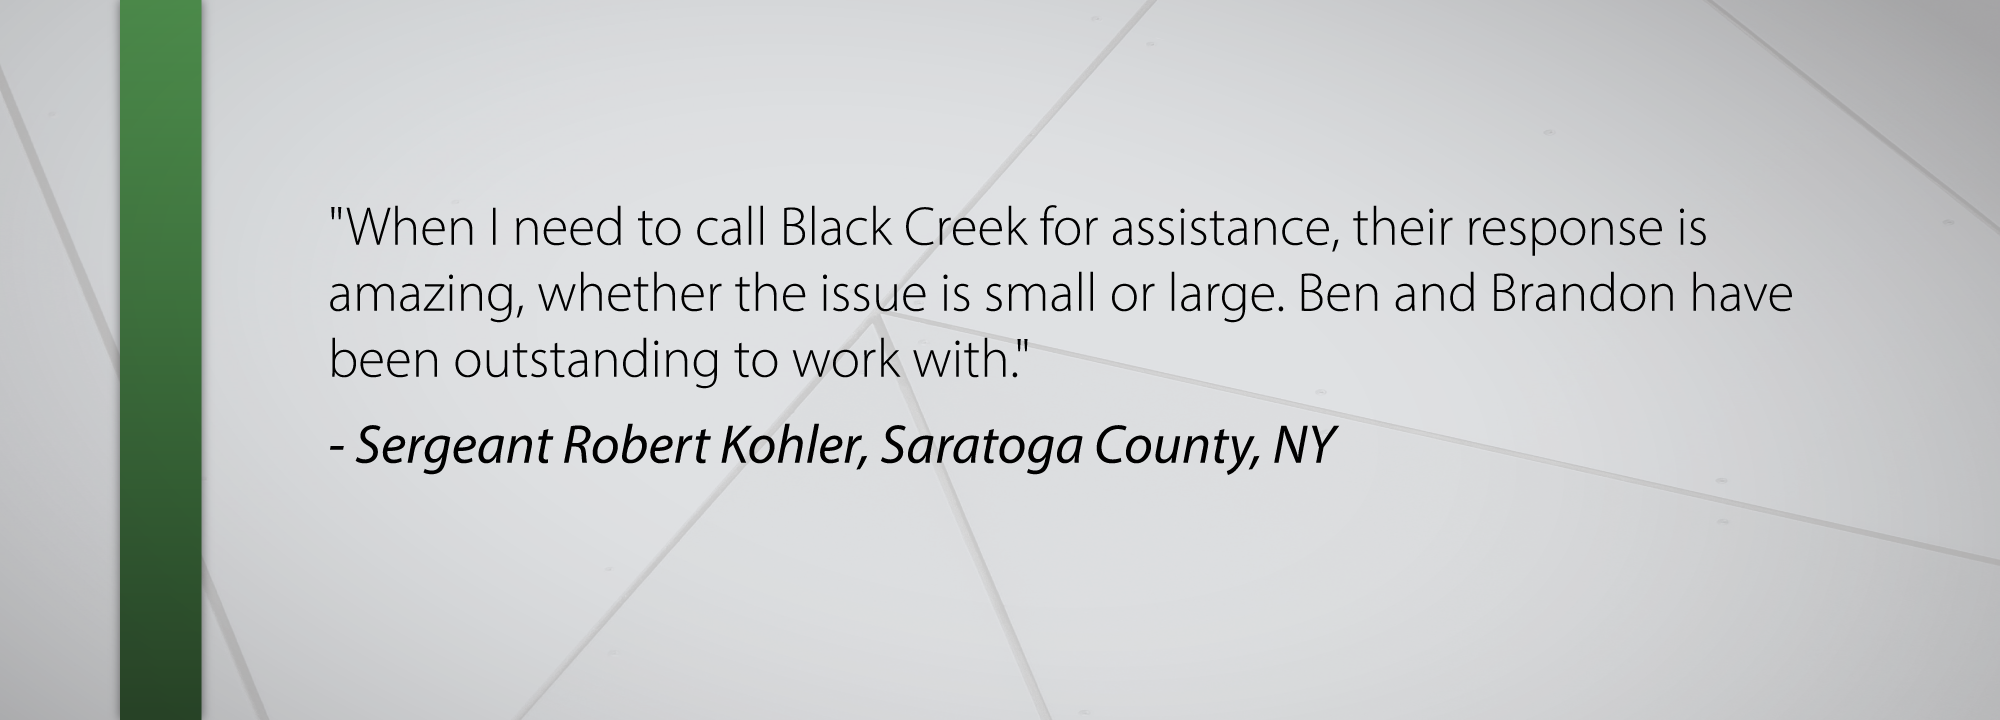 When I need to call Black Creek for assistance, their response is amazing, whether the issue is small or large. Ben and Brandon have been outstanding to work with. - Sergeant Robert Kohler, Saratoga County, NY